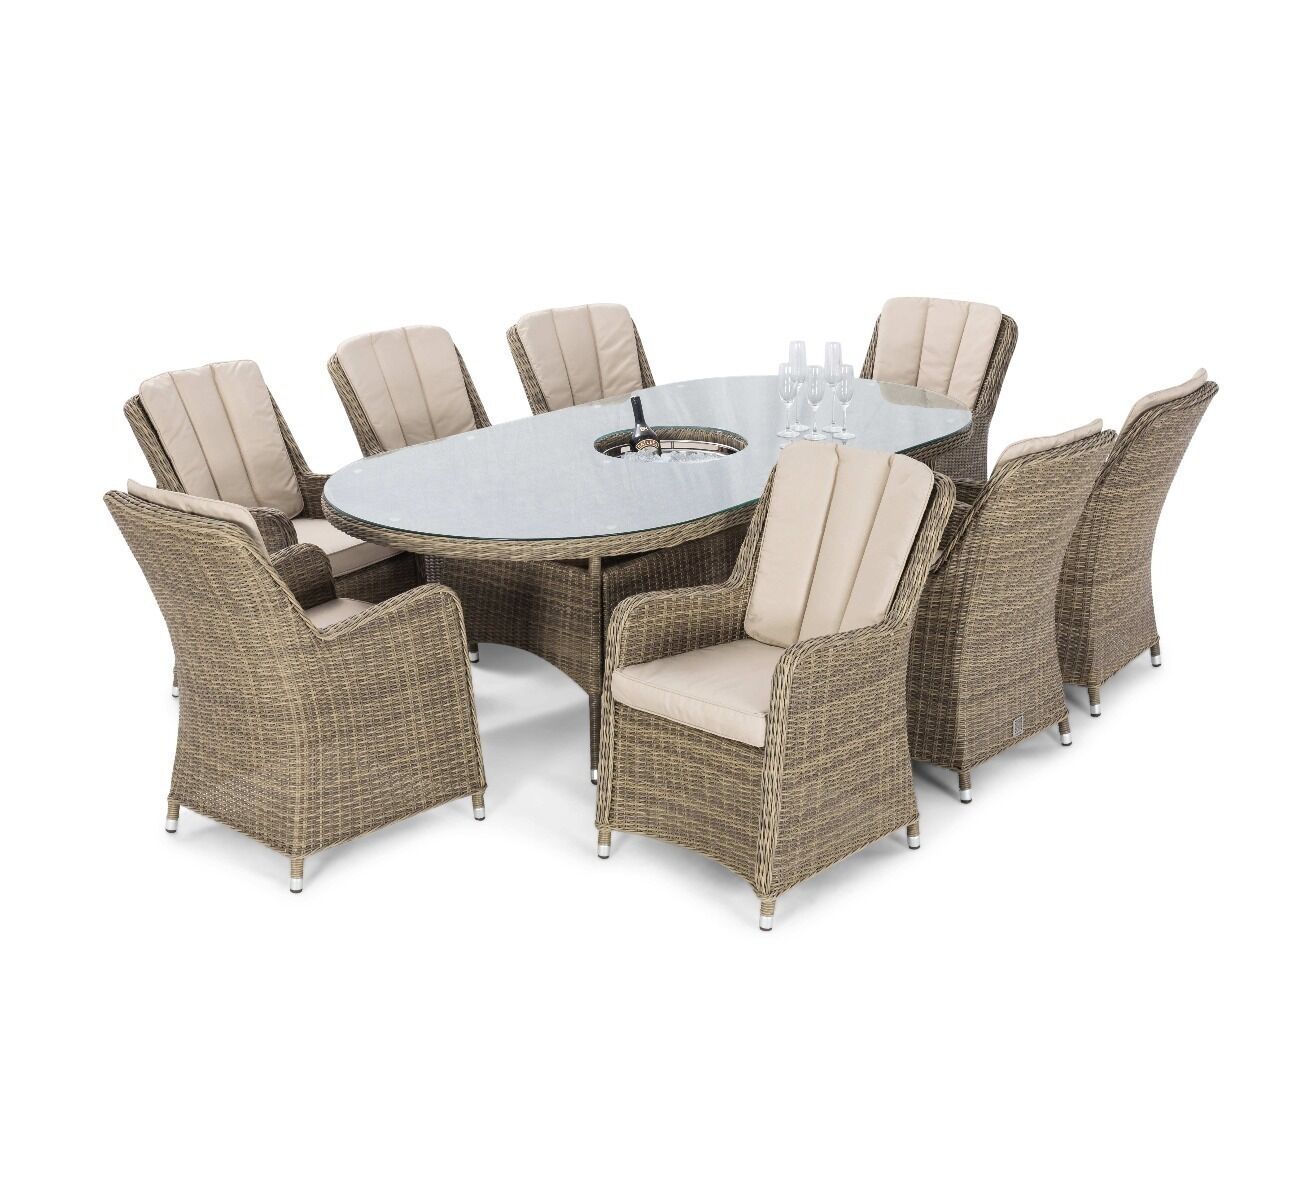 Maze - Winchester Venice 8 Seat Oval Rattan Dining Set with Ice Bucket & Lazy Susan product image